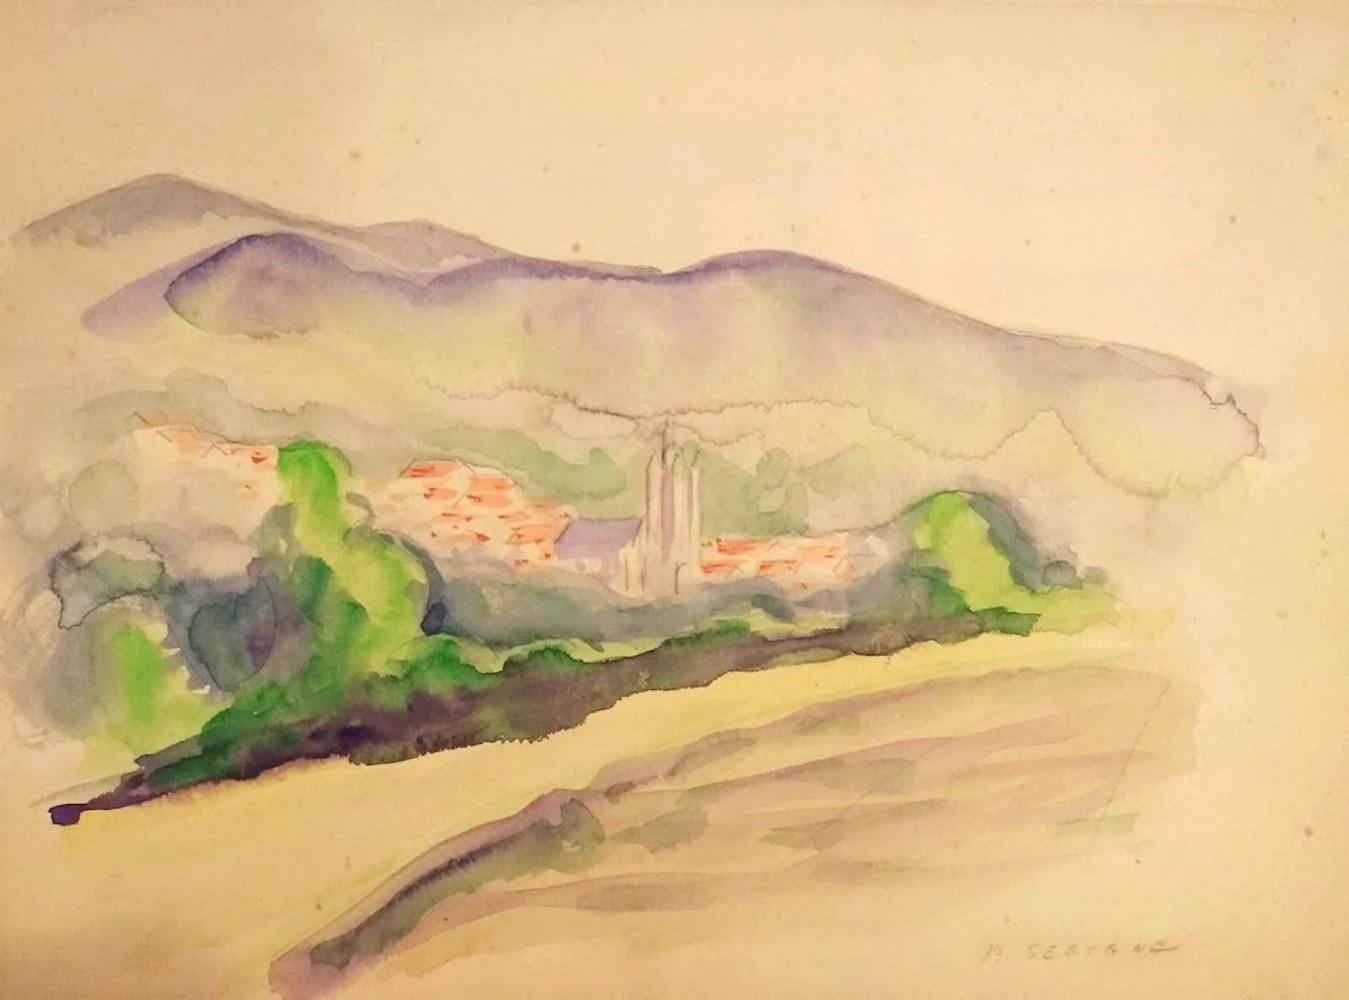 Mountain Landscape Northern in France is an original modern artwork realized in the 1930s by the French artist Pierre Segogne (1890-1958).

Original colored watercolor on paper.

Hand-signed by the artist in pencil on the lower right margin: P.